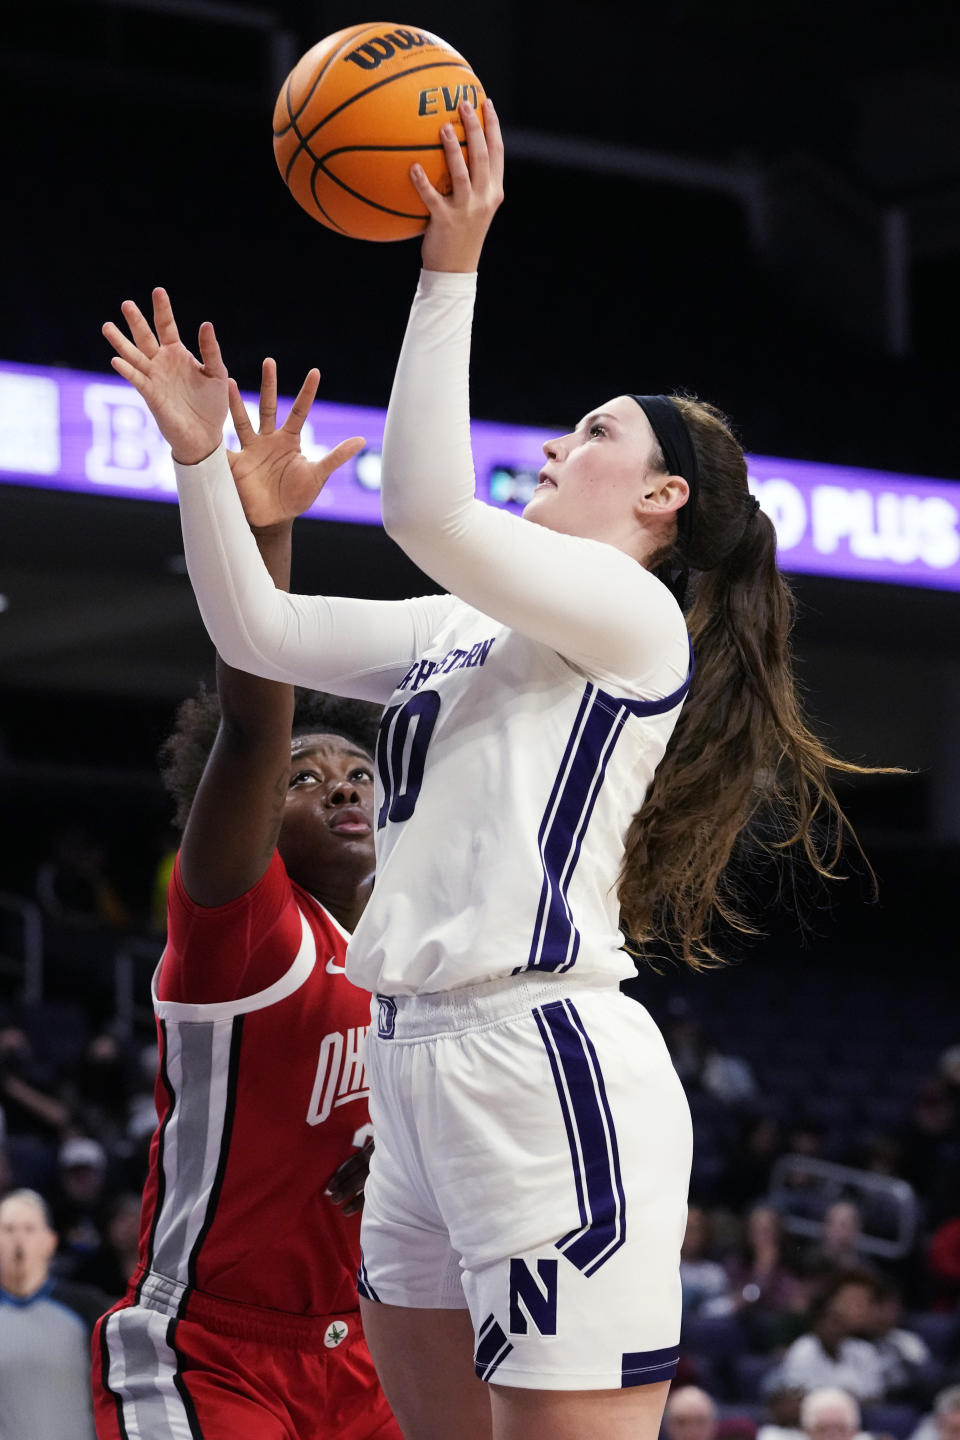 Northwestern forward Caileigh Walsh, right, goes up for a shot against Ohio State forward Eboni Walker during the second half of an NCAA college basketball game Wednesday, Dec. 28, 2022, in Evanston, Ill. Ohio State won 81-48. (AP Photo/Nam Y. Huh)